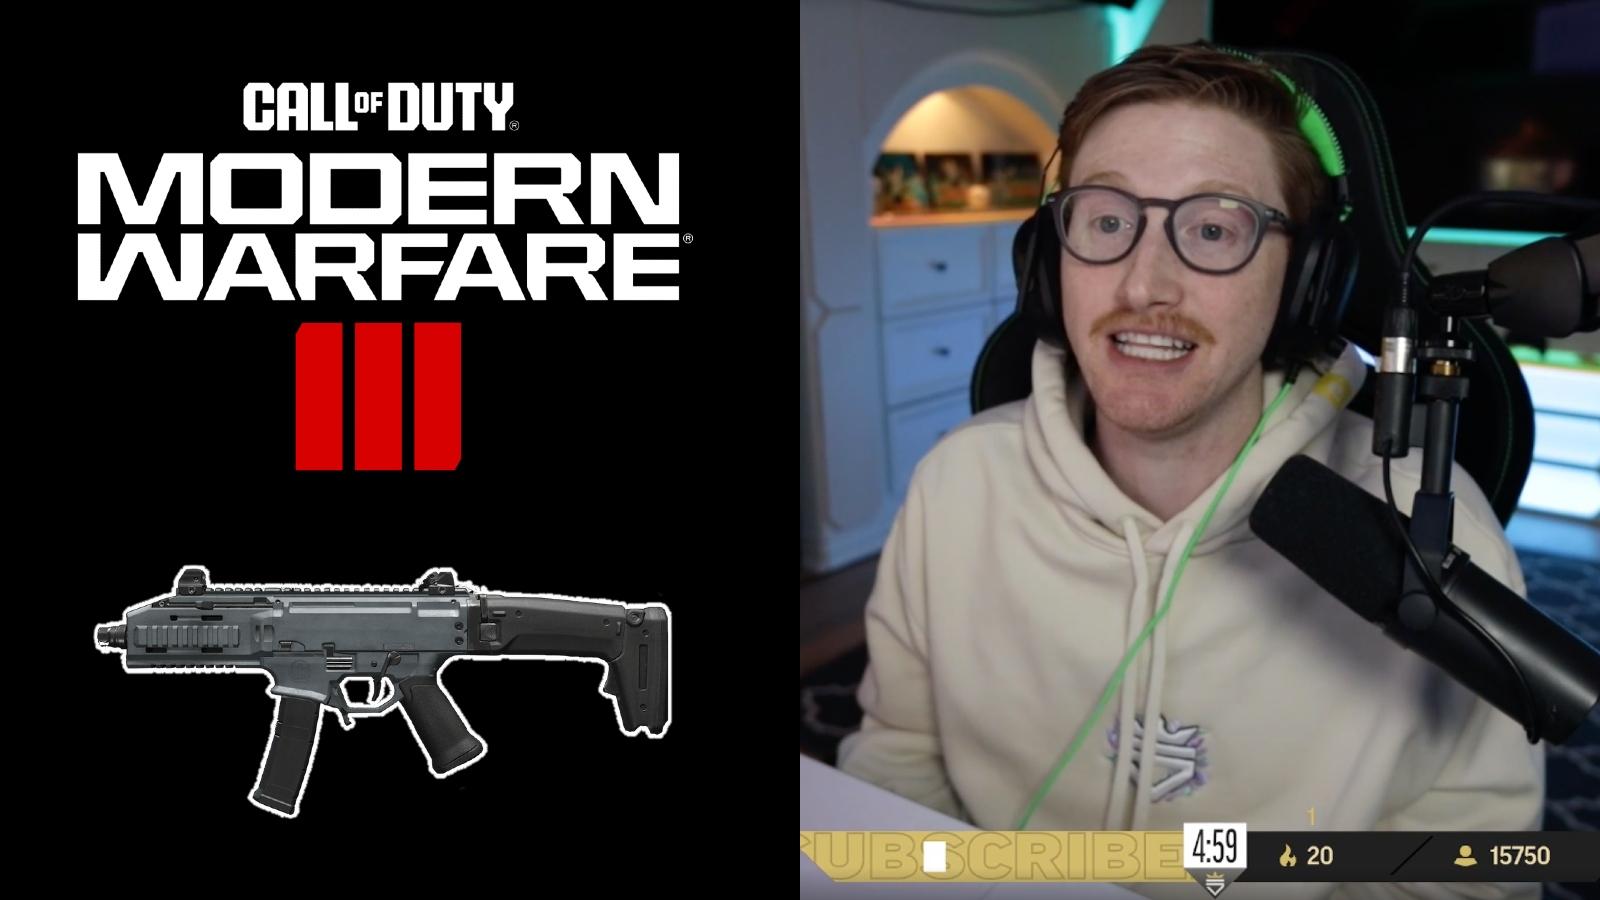 Picture of Scump in Twitch stream next to image of Rival 9 SMG